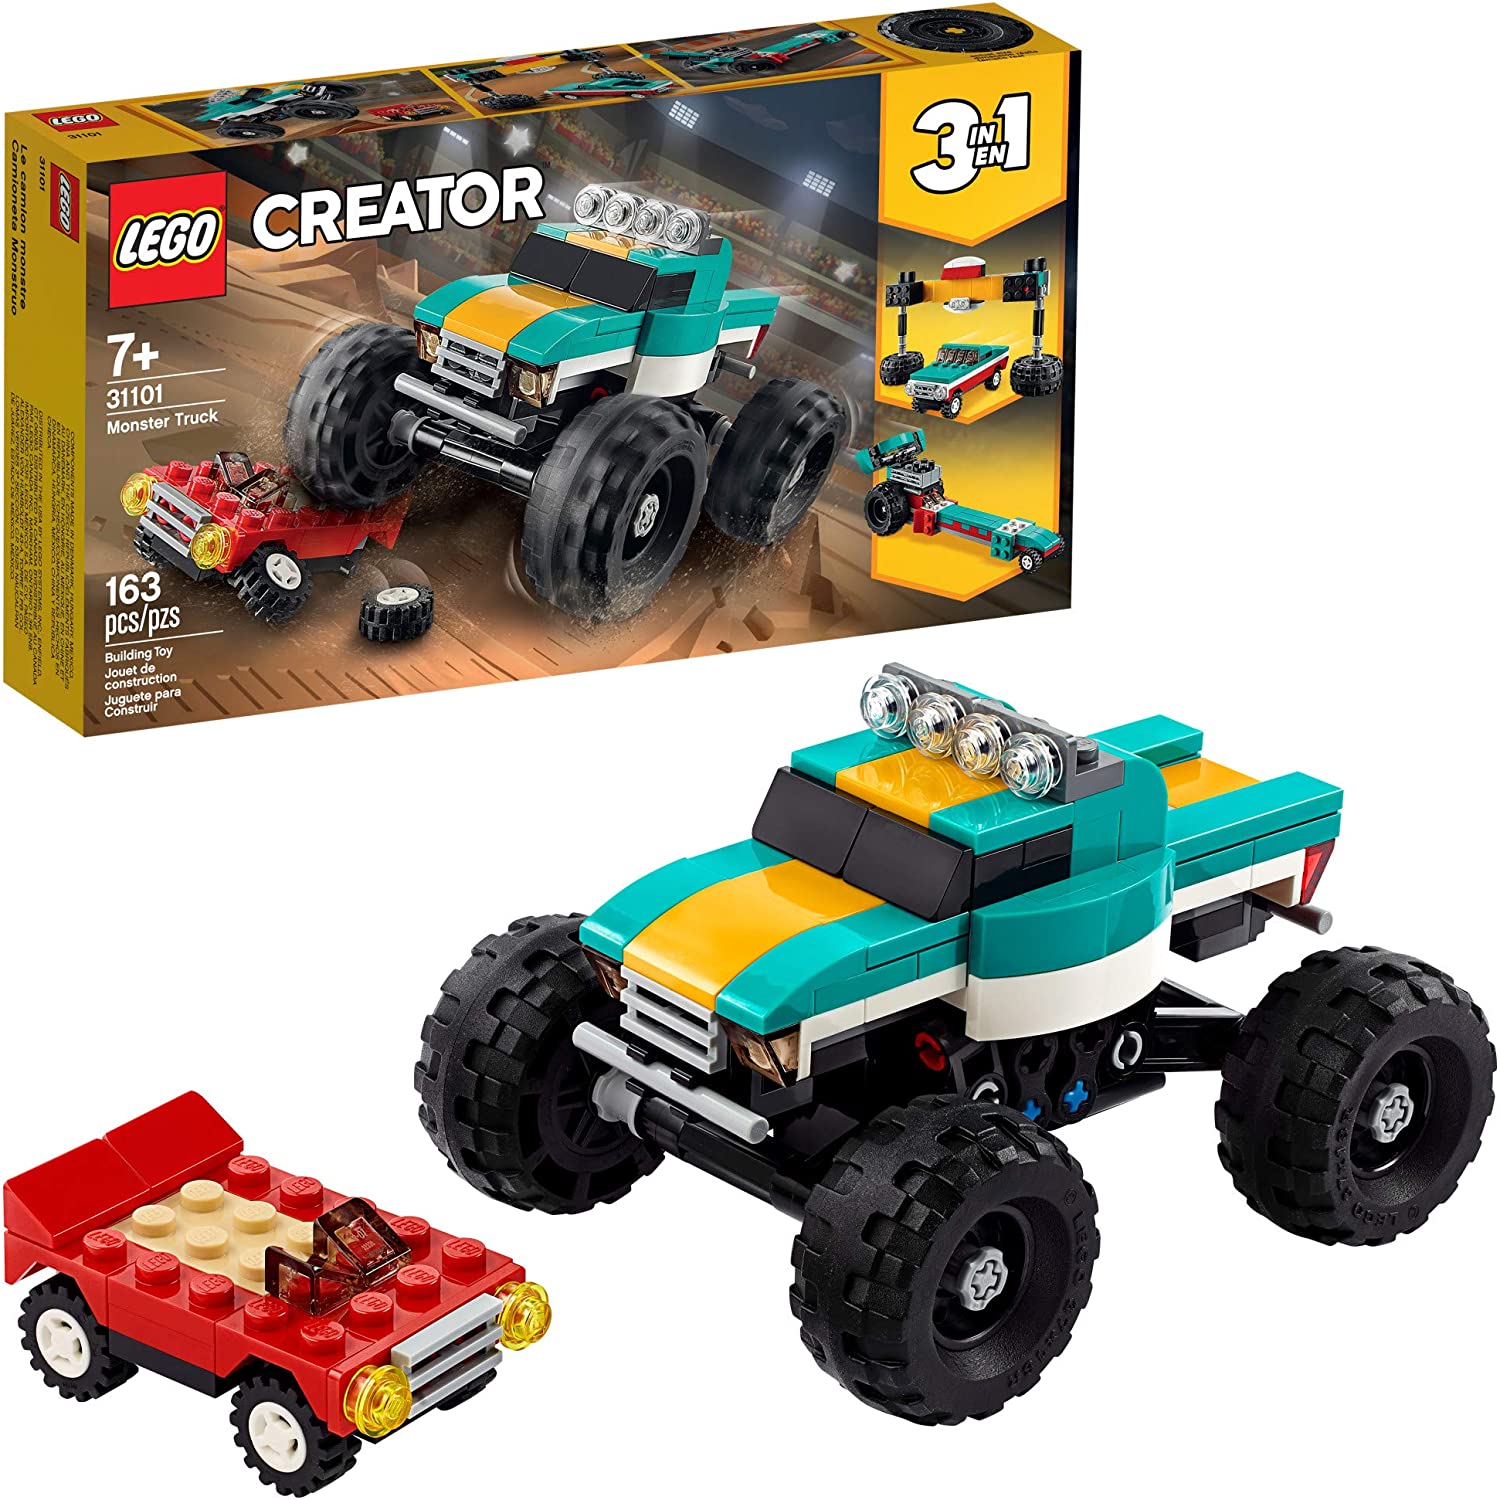 163-Piece LEGO Creator 3-in-1 Monster Truck Toy (31101) $10.70 + Free Shipping w/ Prime or $25+